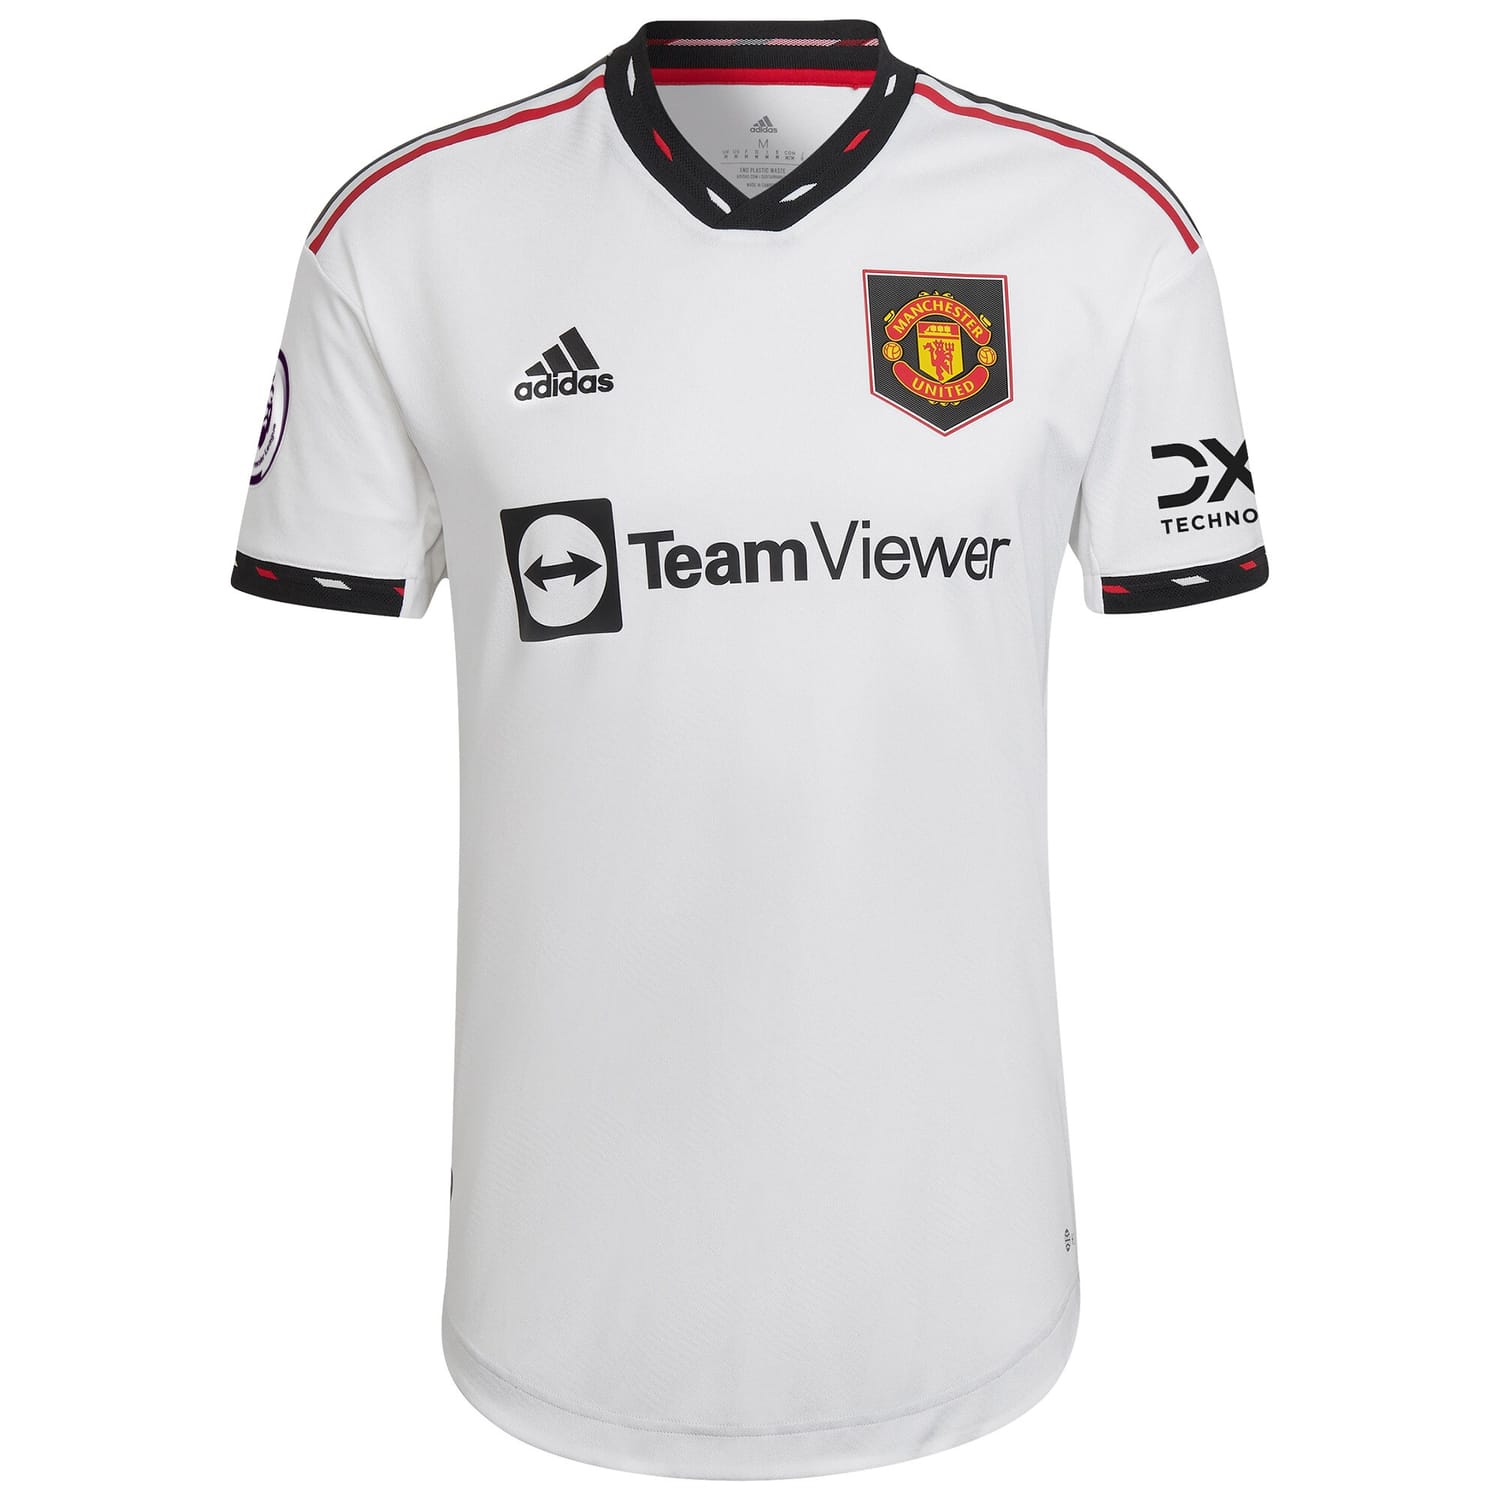 Premier League Manchester United Away Authentic Jersey Shirt White 2022-23 player Antony printing for Men